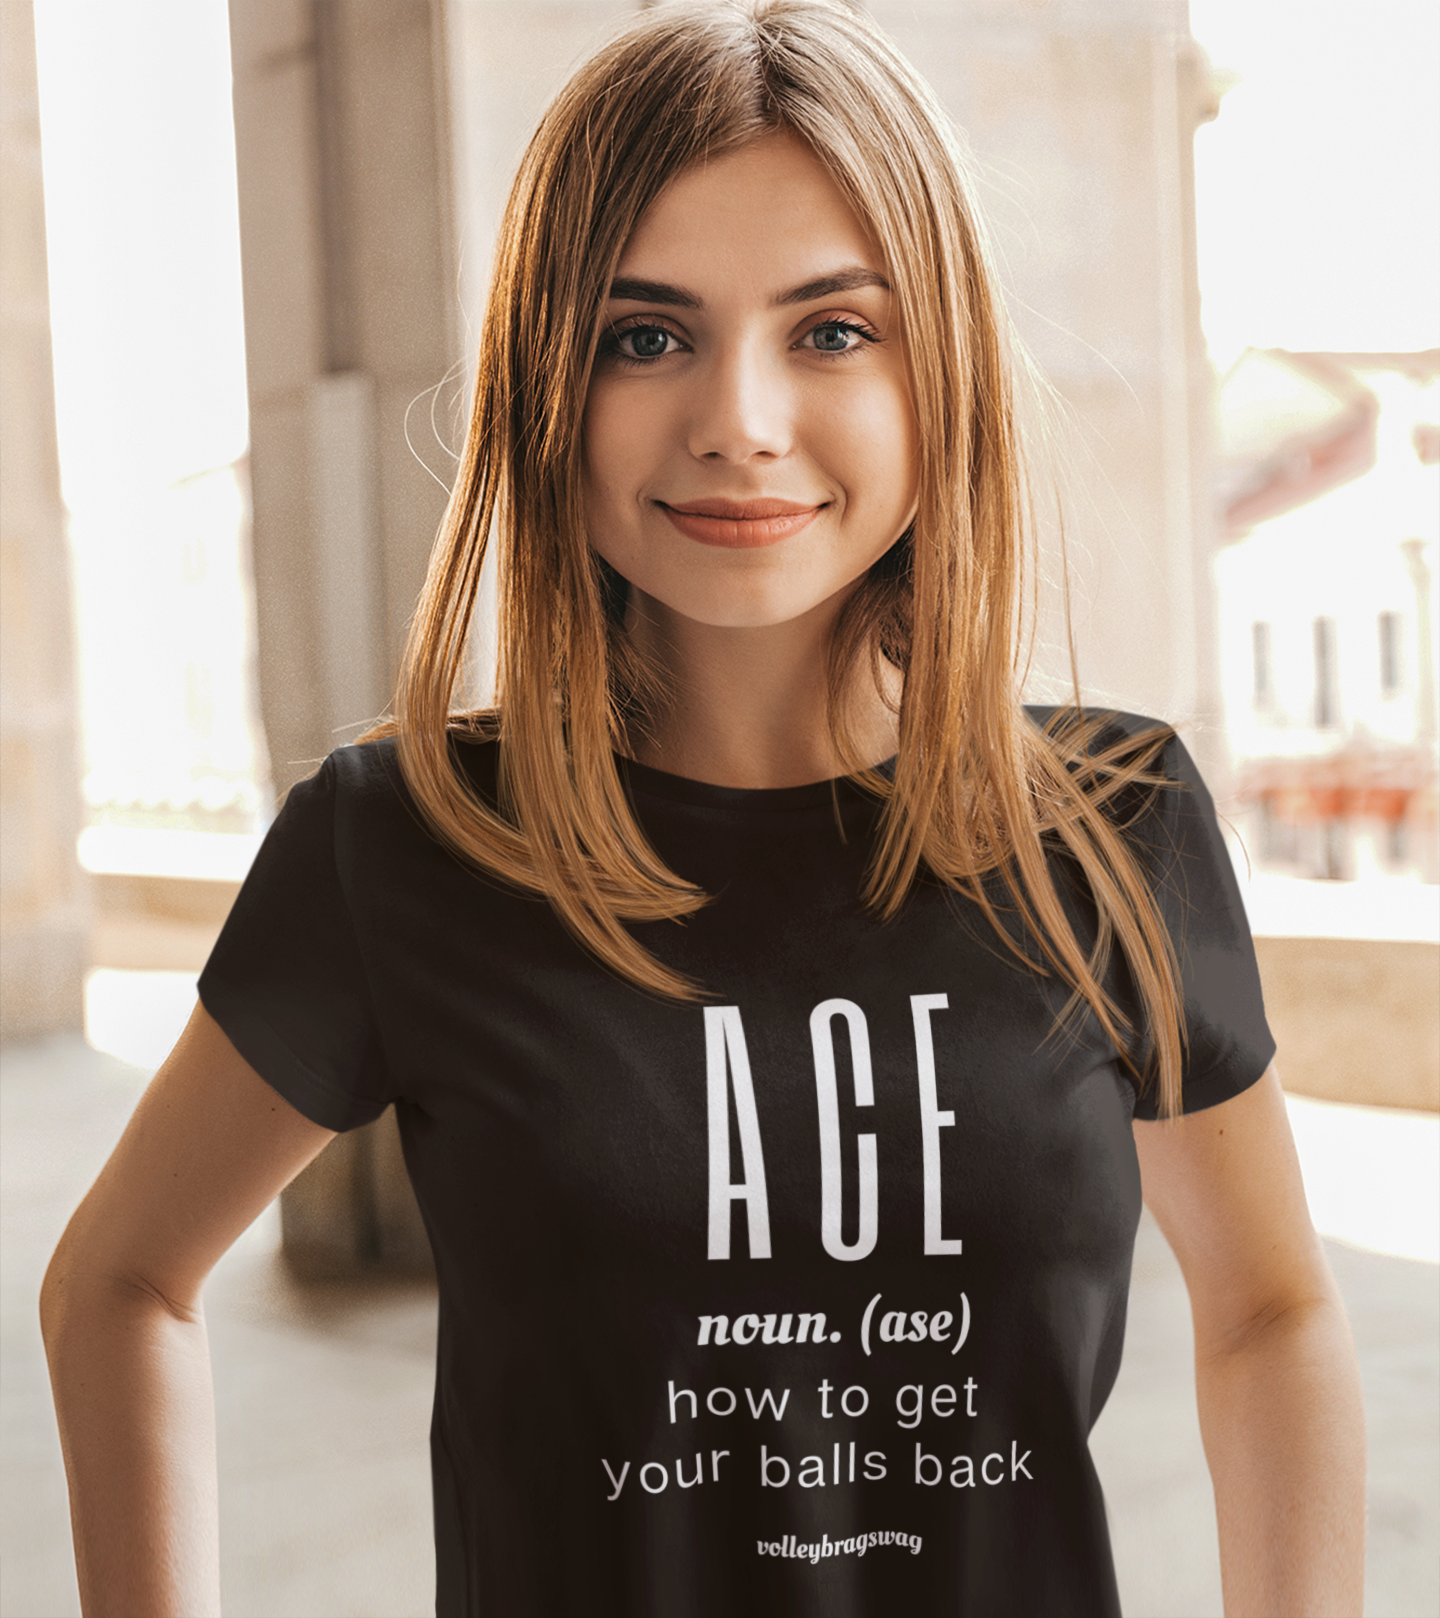 ACE-(noun) how To get your balls back shirt by Coach Apchap available on Amazon. An ace is a direct point scored by the serving team because the receiving team could not pass it to make a play out of the serve and return it over the net